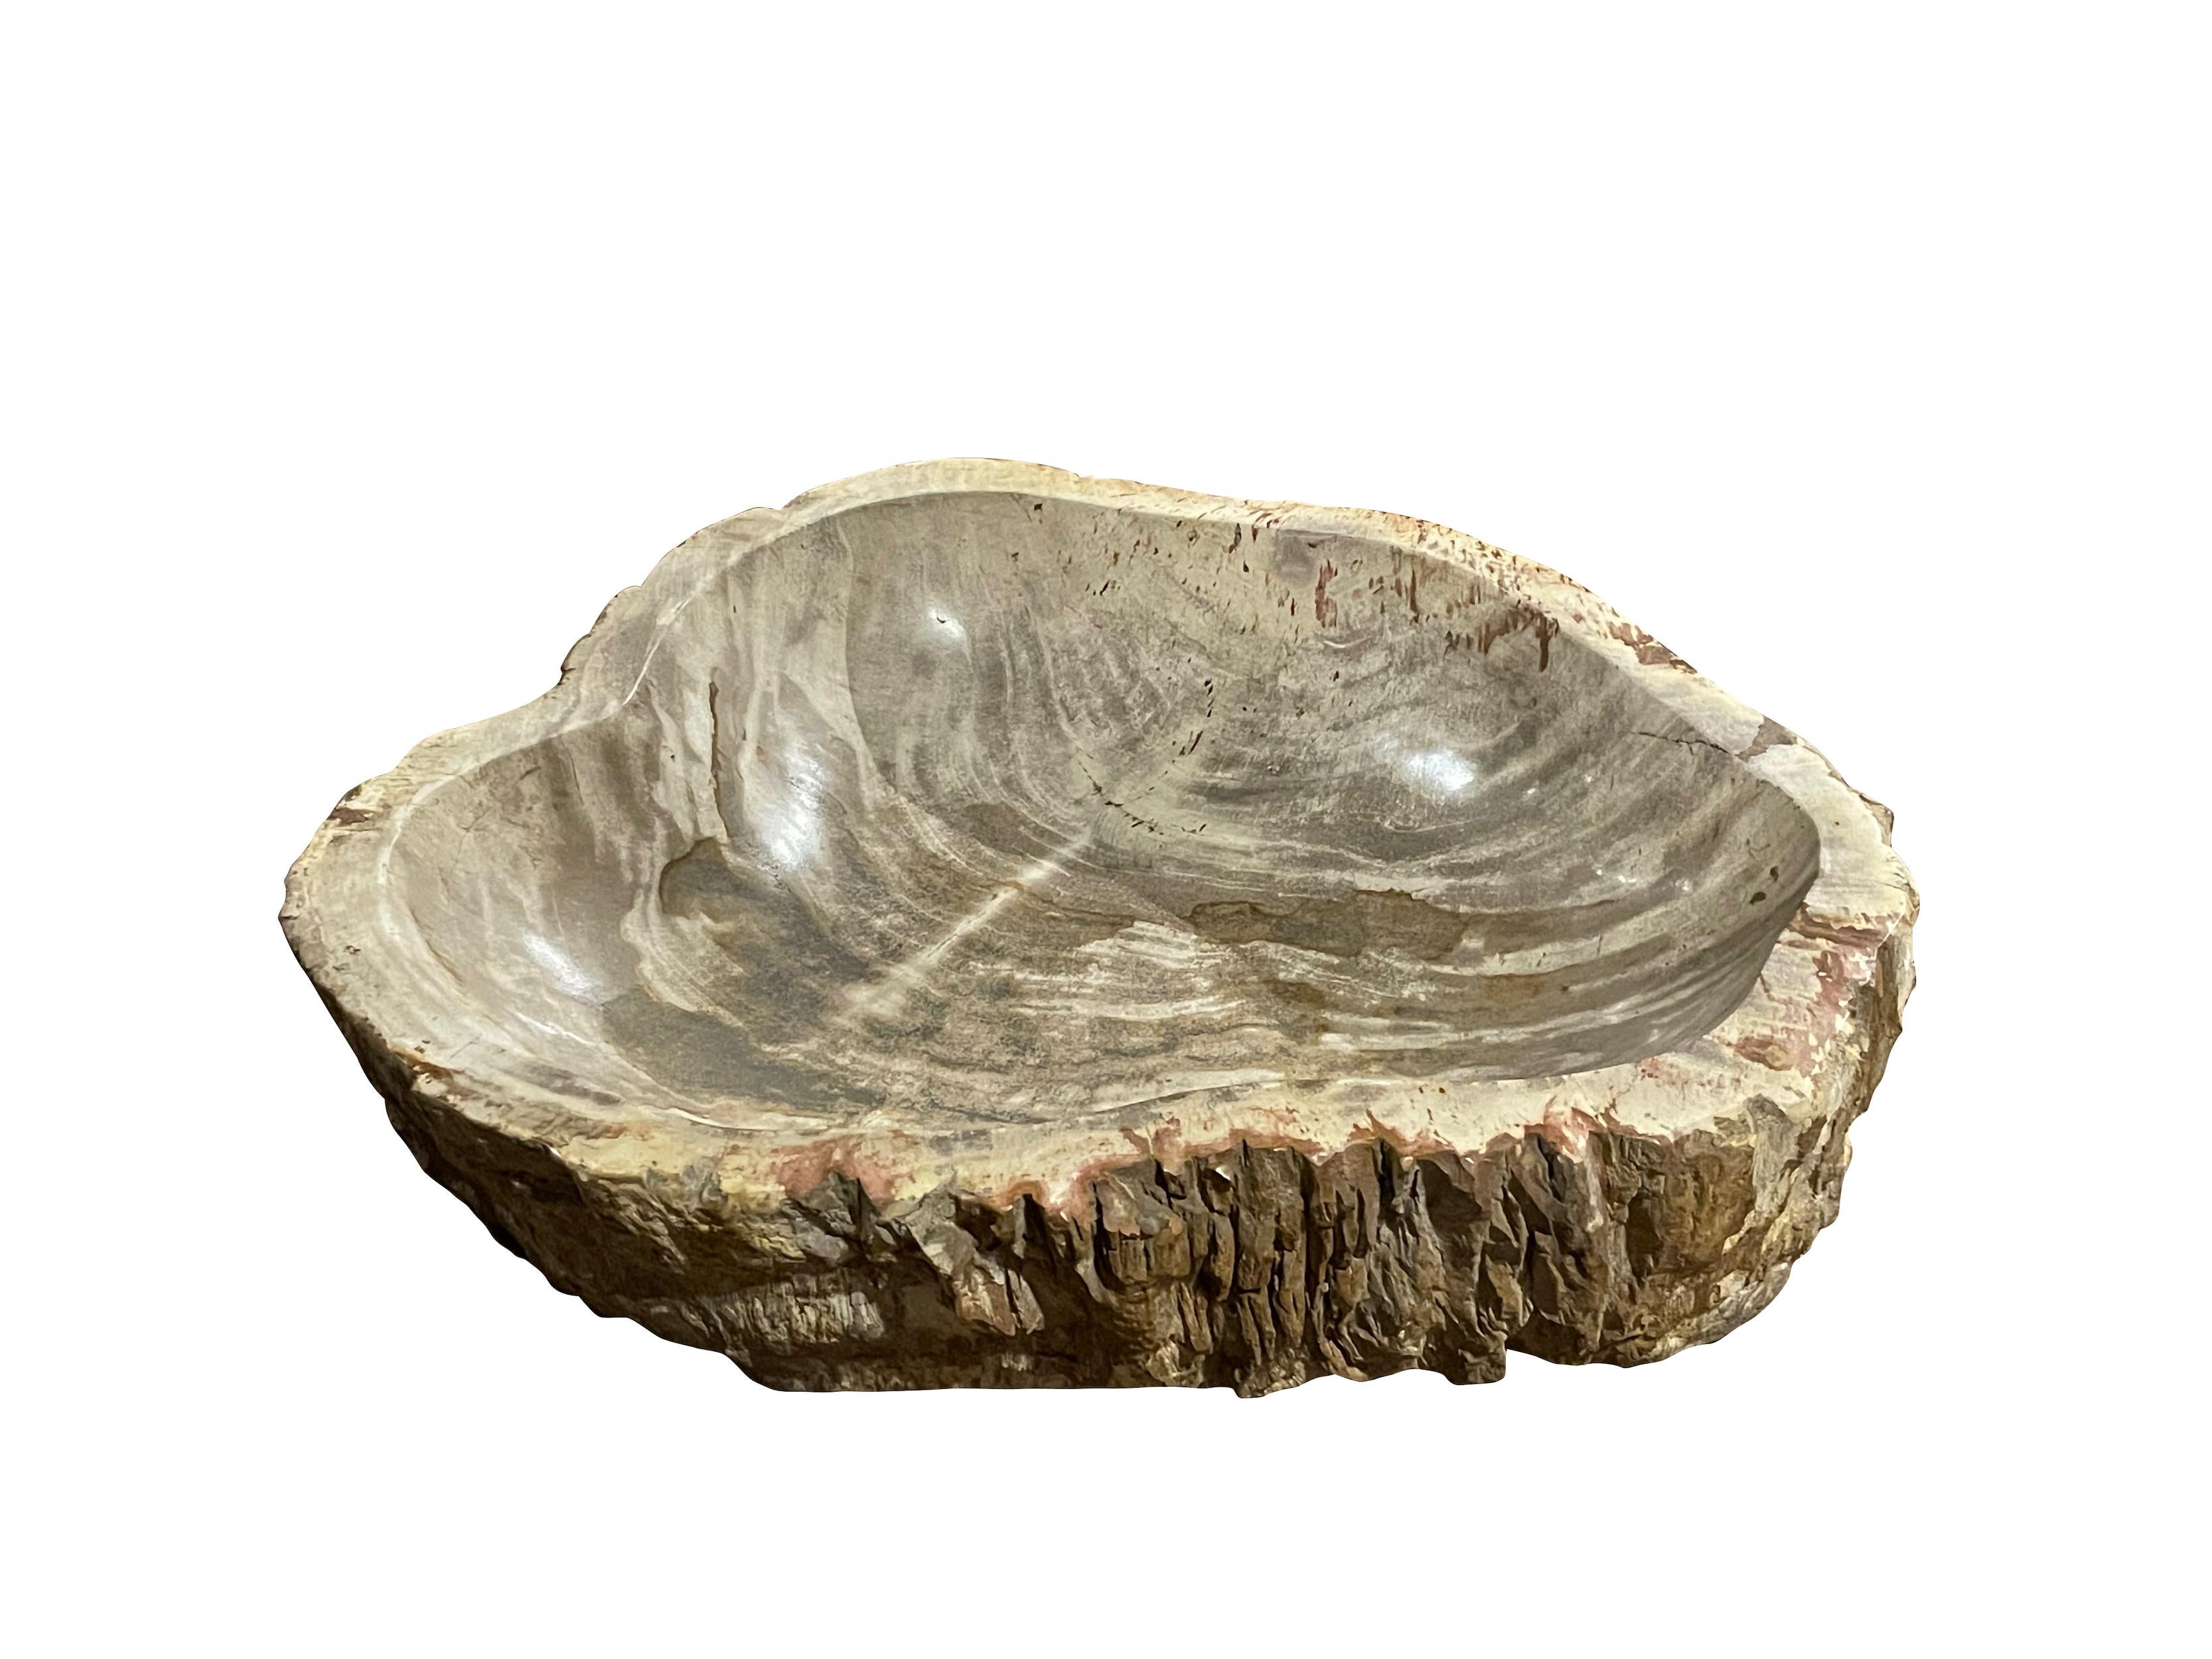 Contemporary Indonesian petrified wood bowl with chiseled rough edges.
Polished smooth interior.
